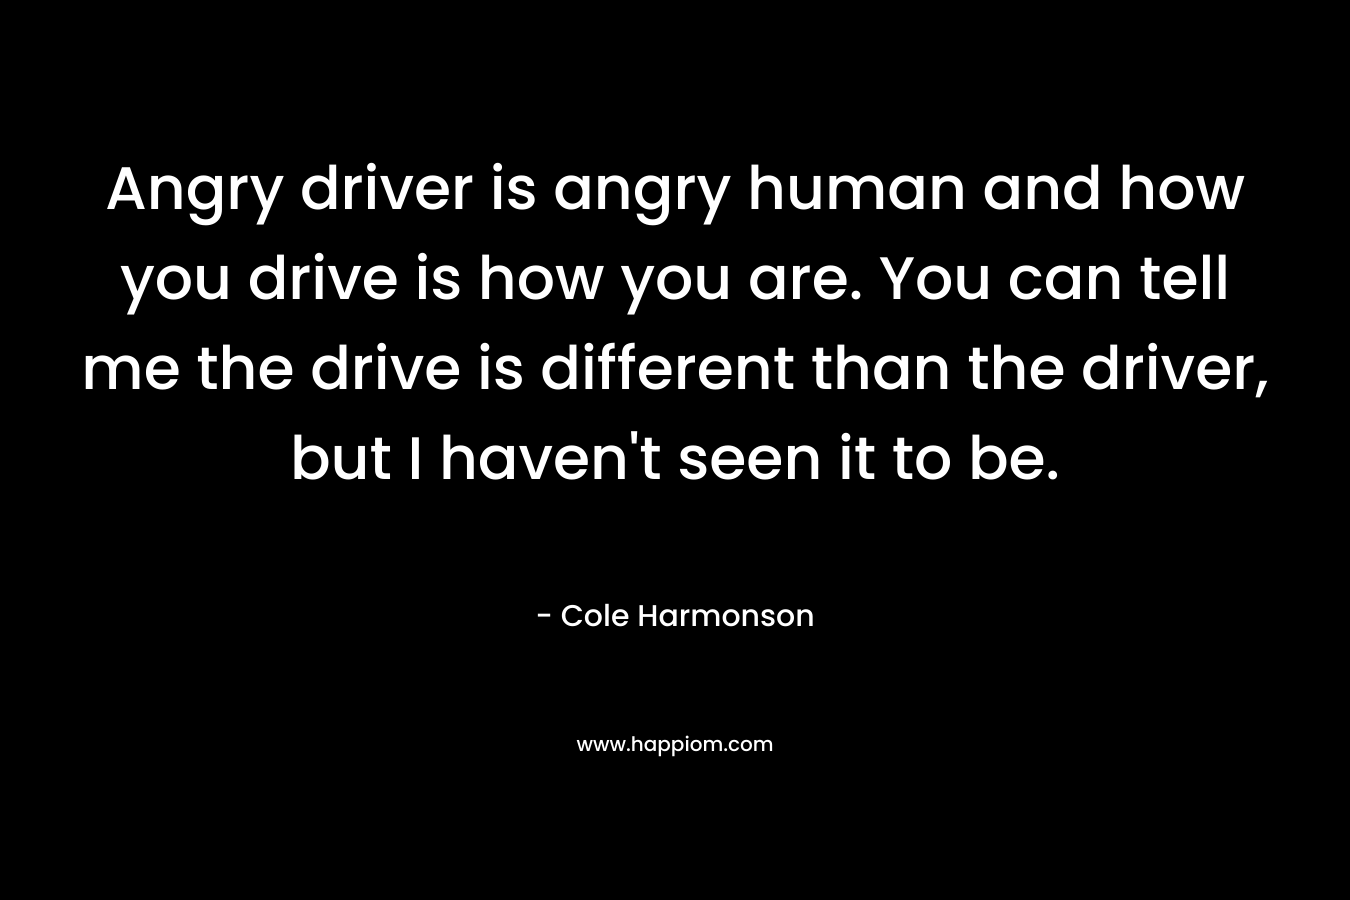 Angry driver is angry human and how you drive is how you are. You can tell me the drive is different than the driver, but I haven’t seen it to be. – Cole Harmonson